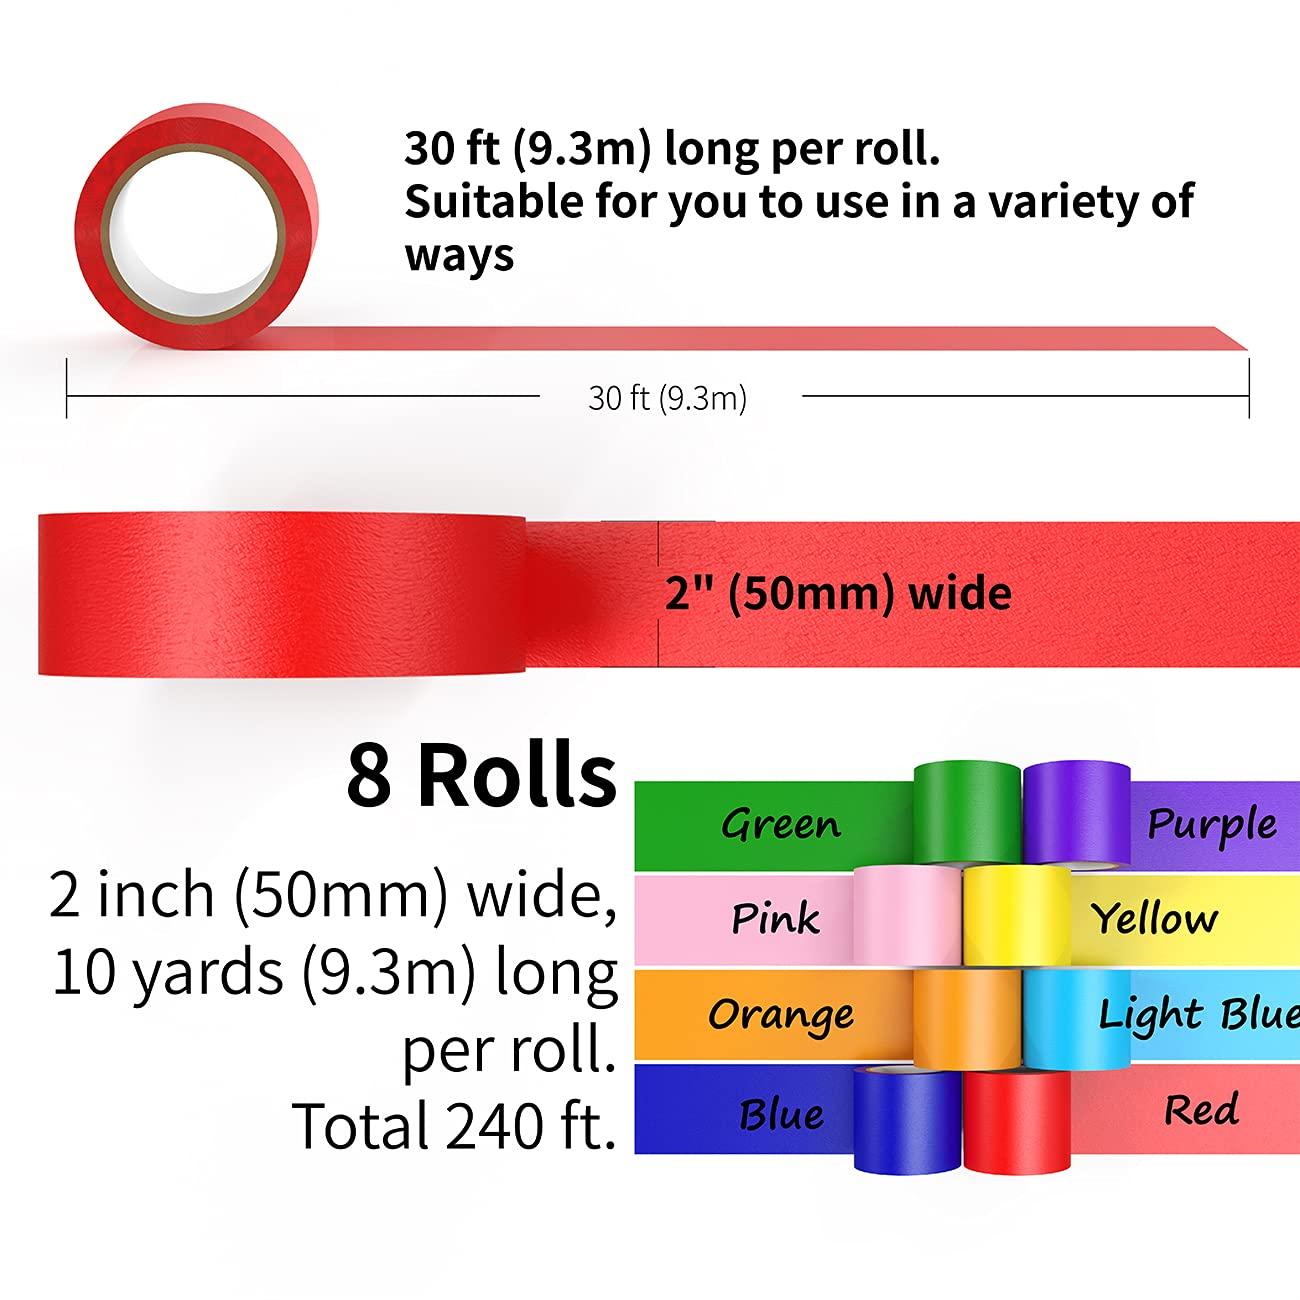 CHIYUNS Colored Masking Tape Rolls, 2 inch Wide Total 240 ft Long